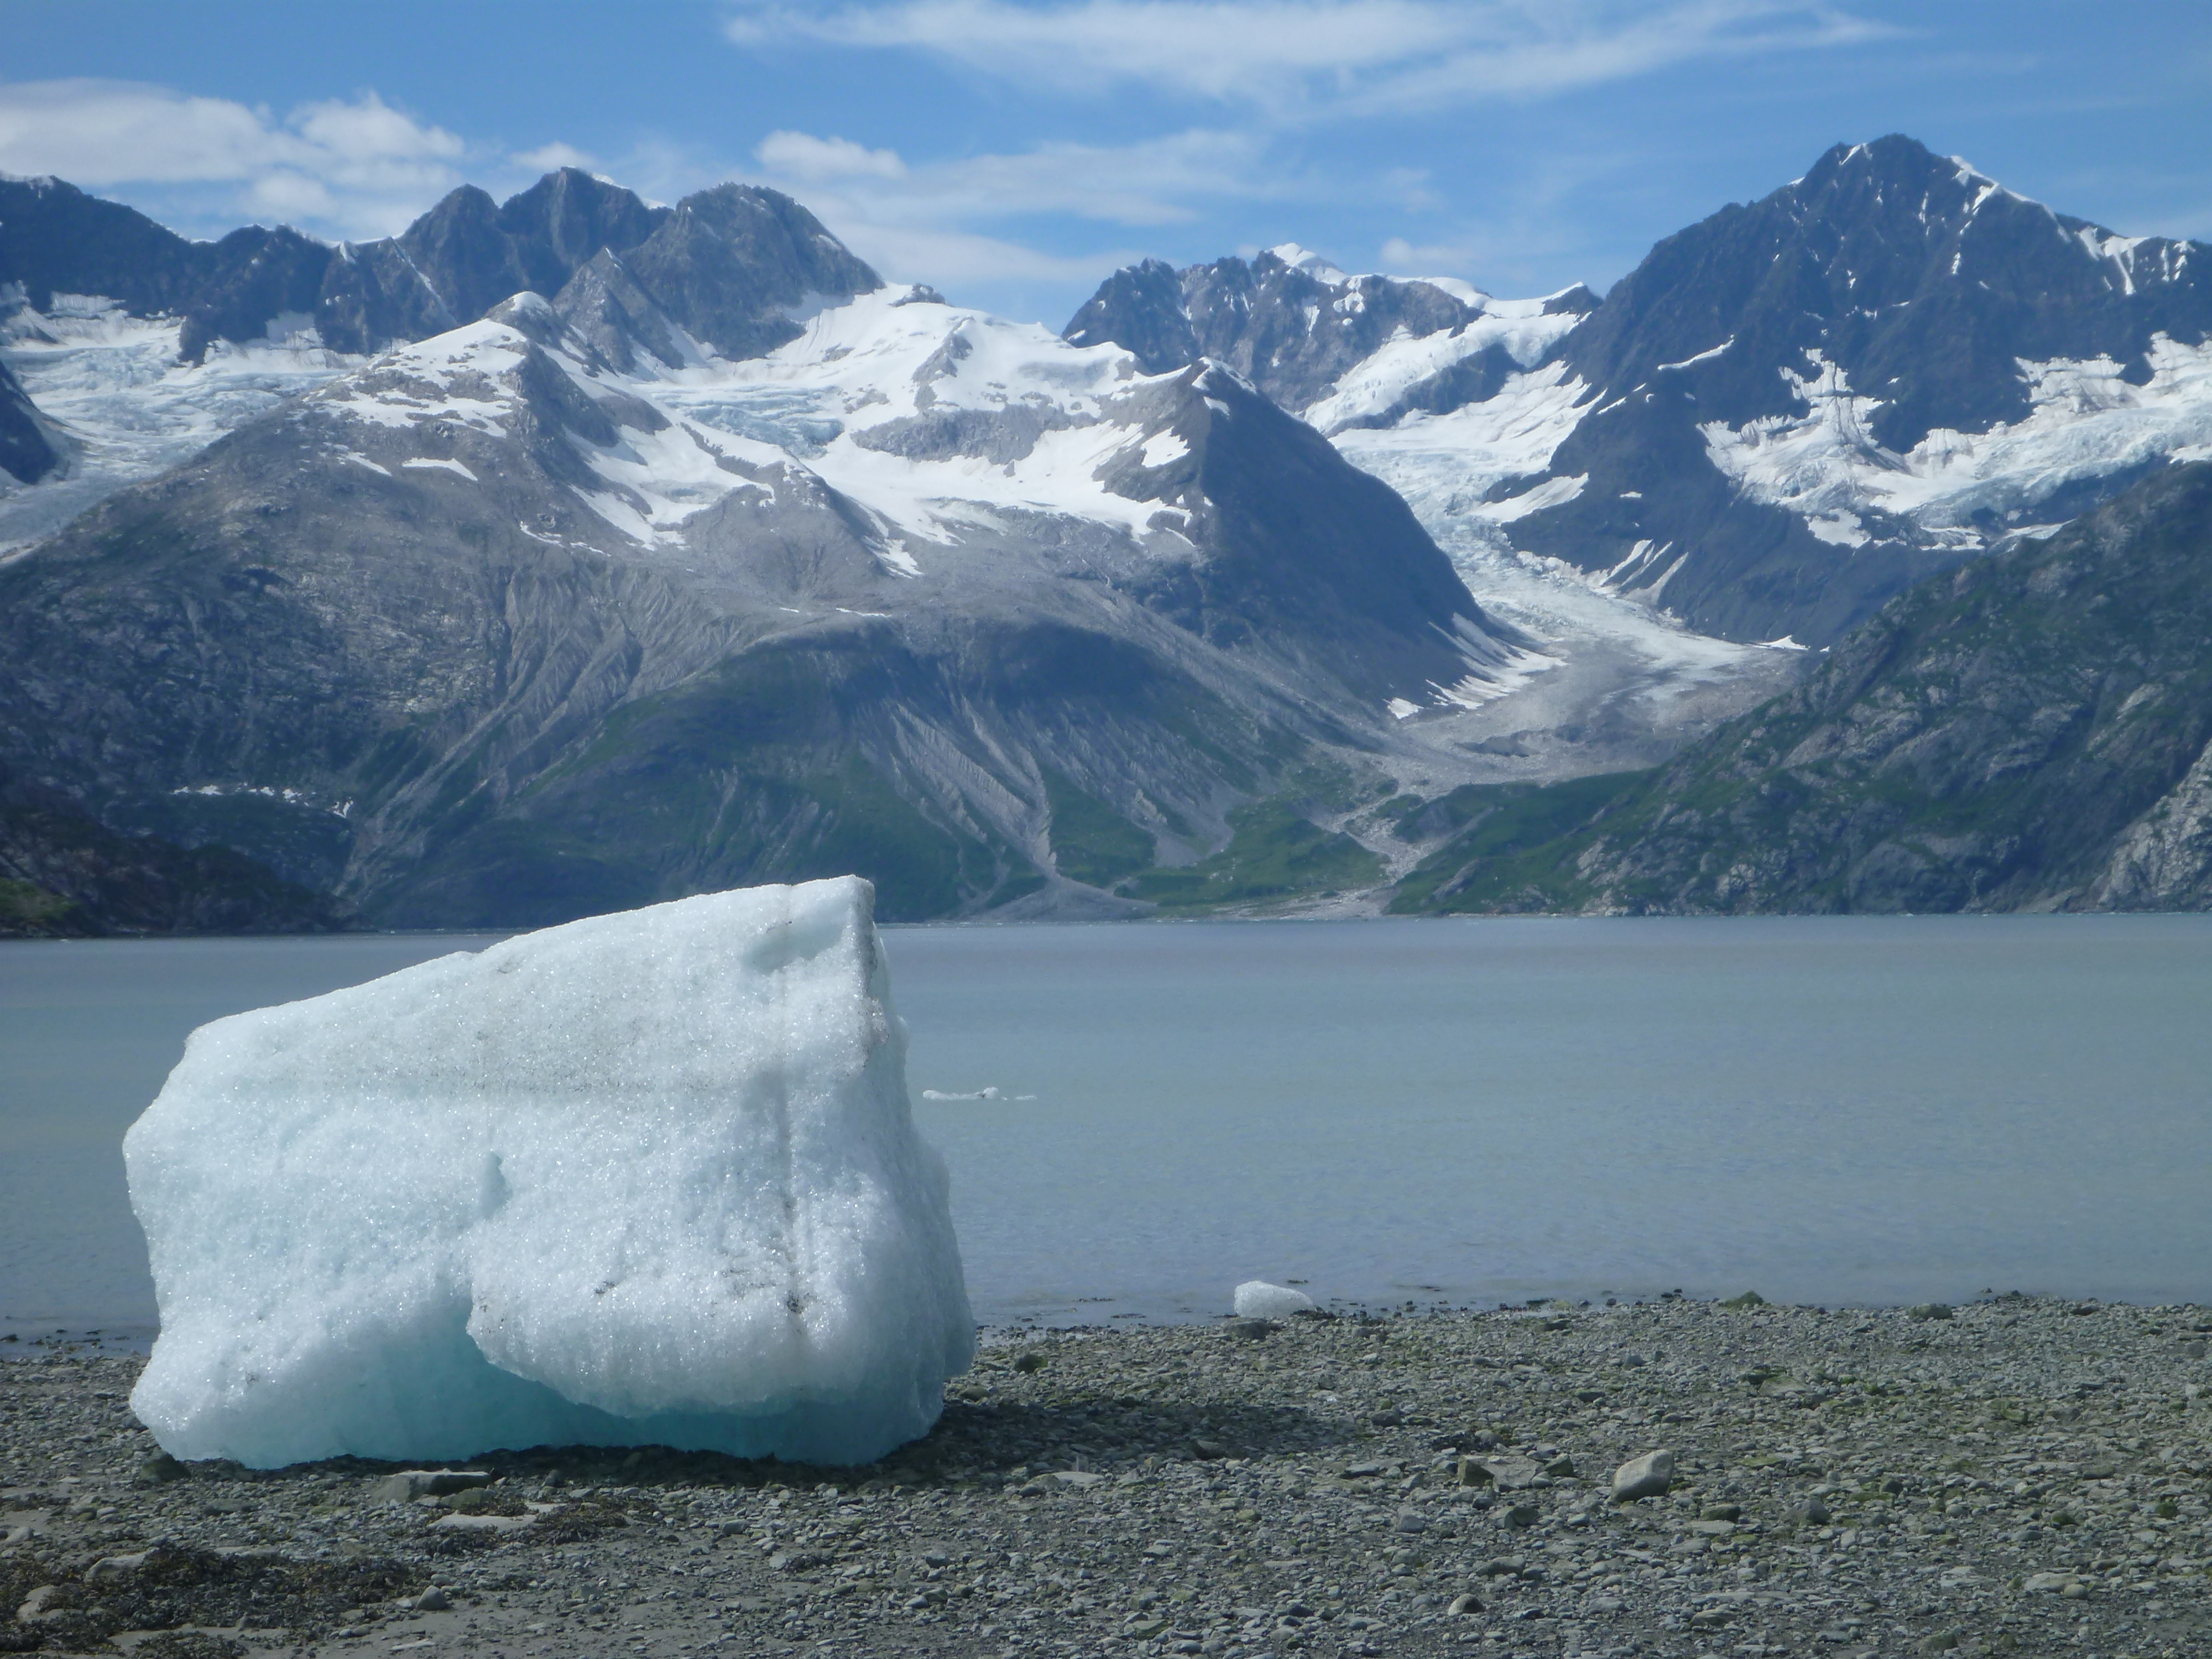 Icebergs, calved from tidewater glaciers are a common sight in Glacier Bay National Park.